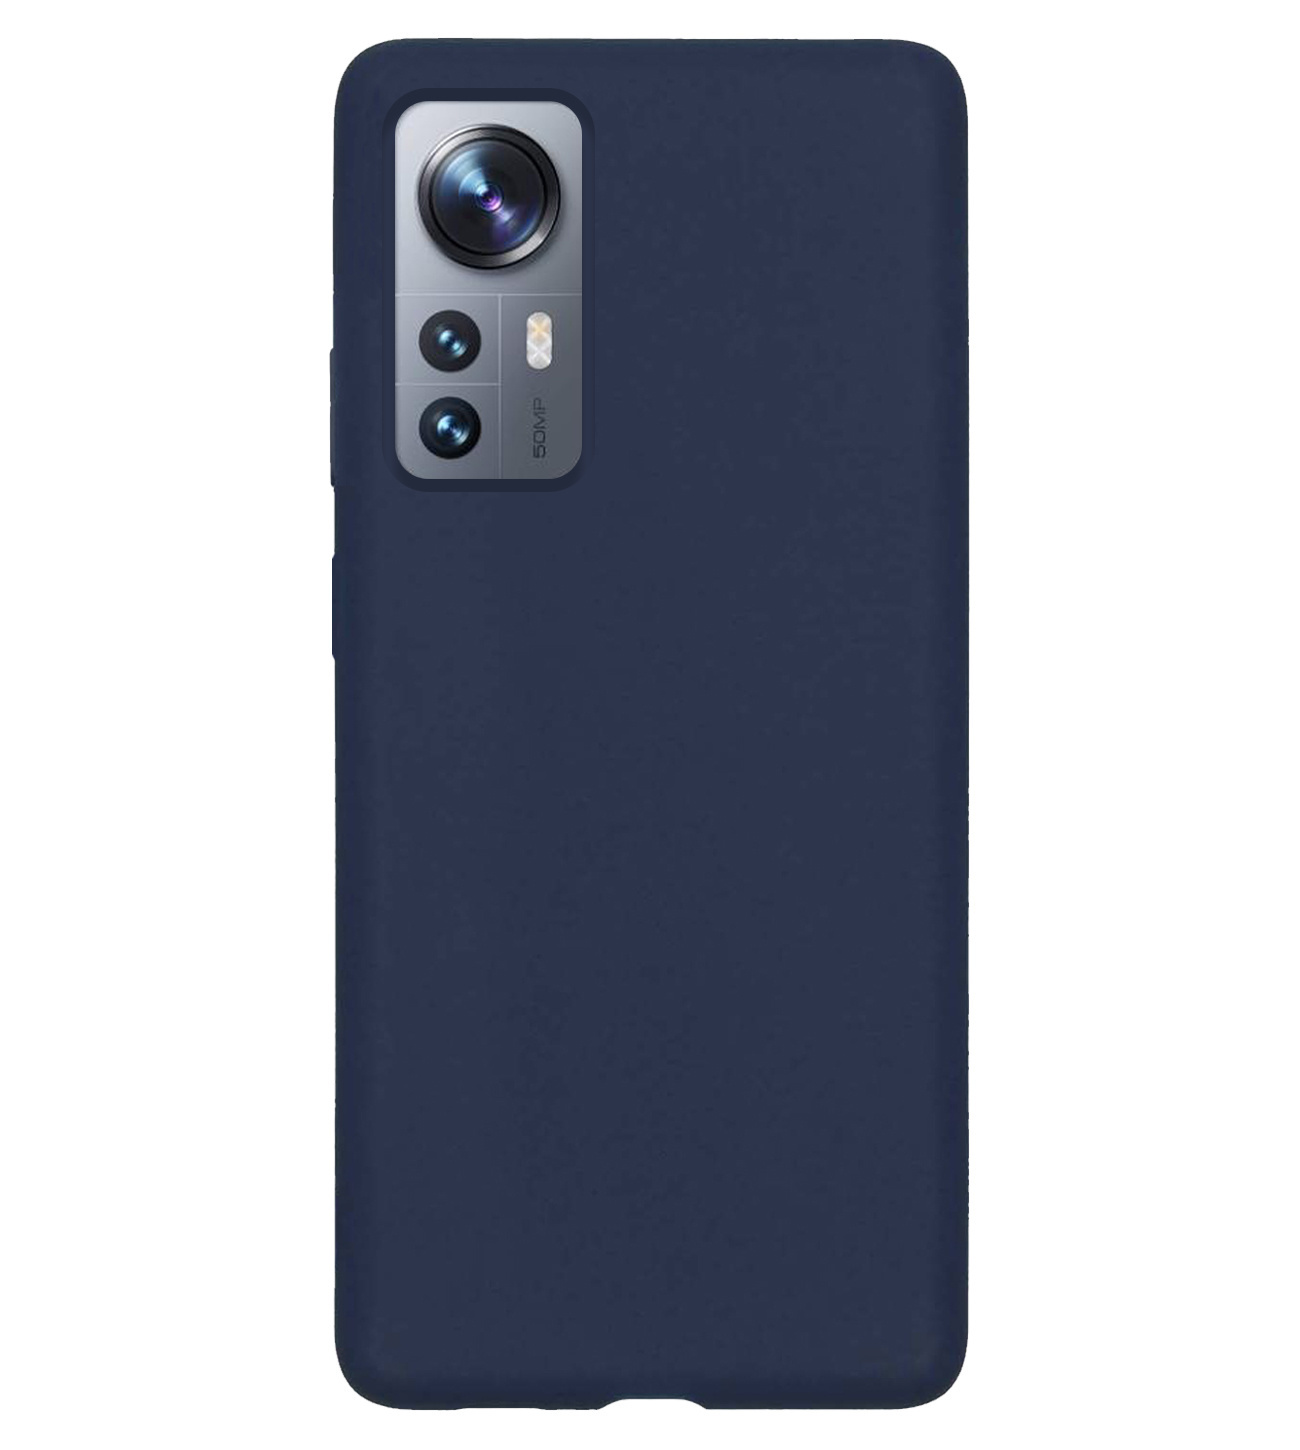 NoXx Xiaomi 12 Hoesje Back Cover Siliconen Case Hoes - Donker Blauw - 2x